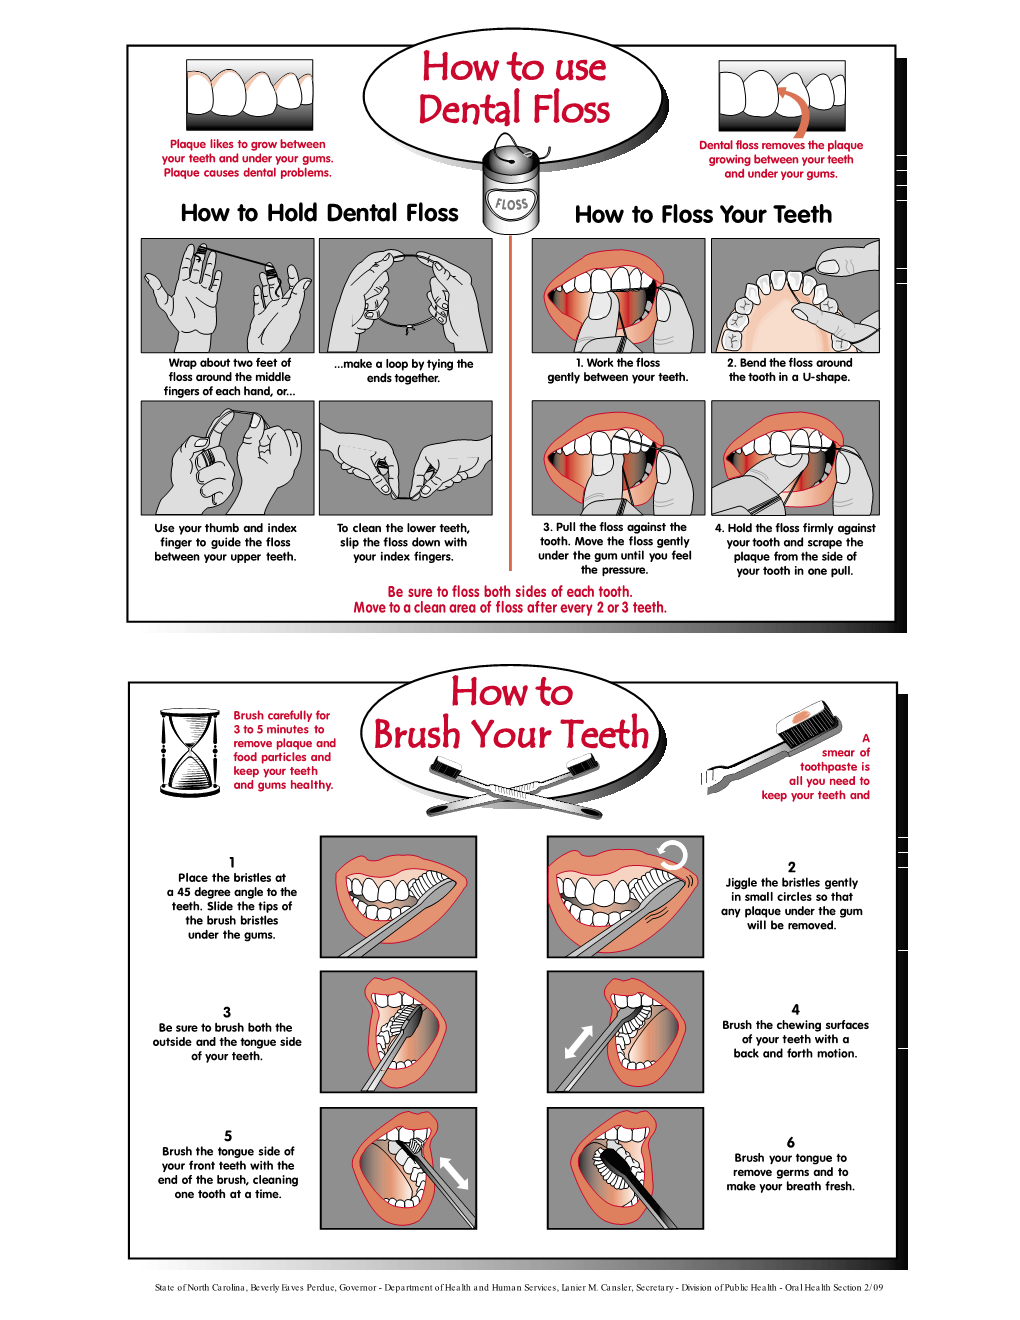 How to Hold Dental Floss How to Floss Your Teeth